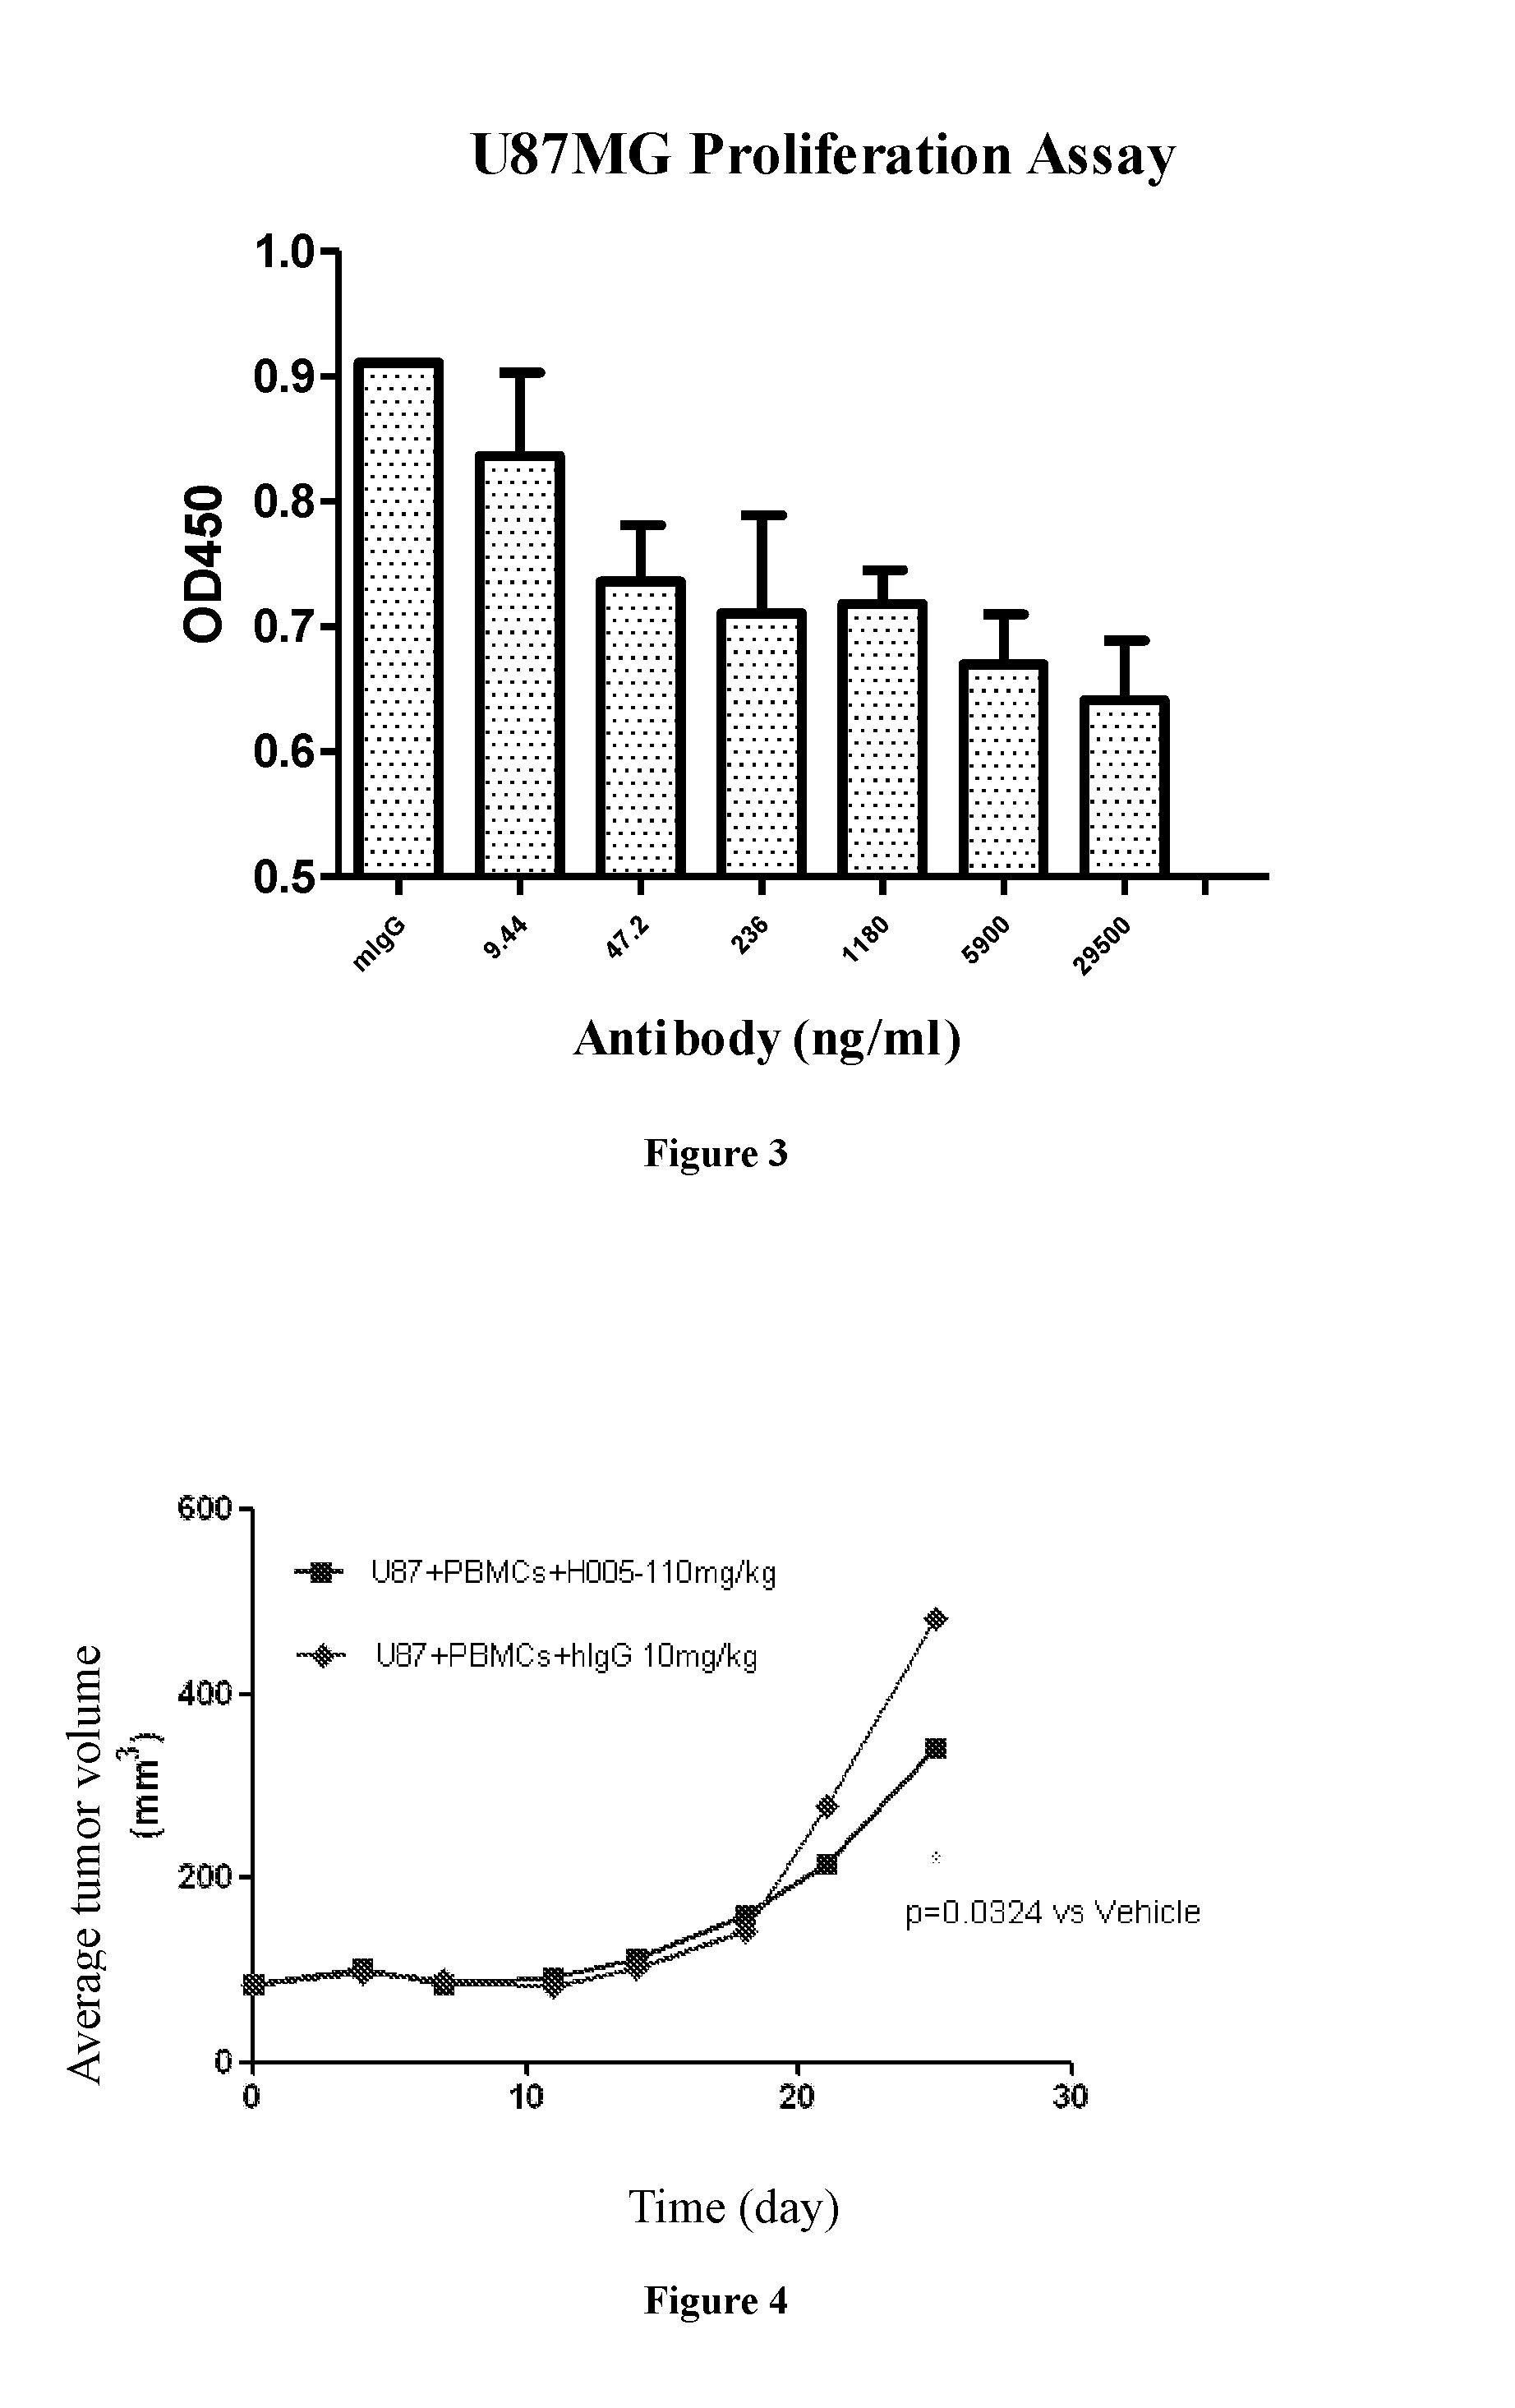 Pd-1 antibody, antigen-binding fragment thereof, and medical application thereof